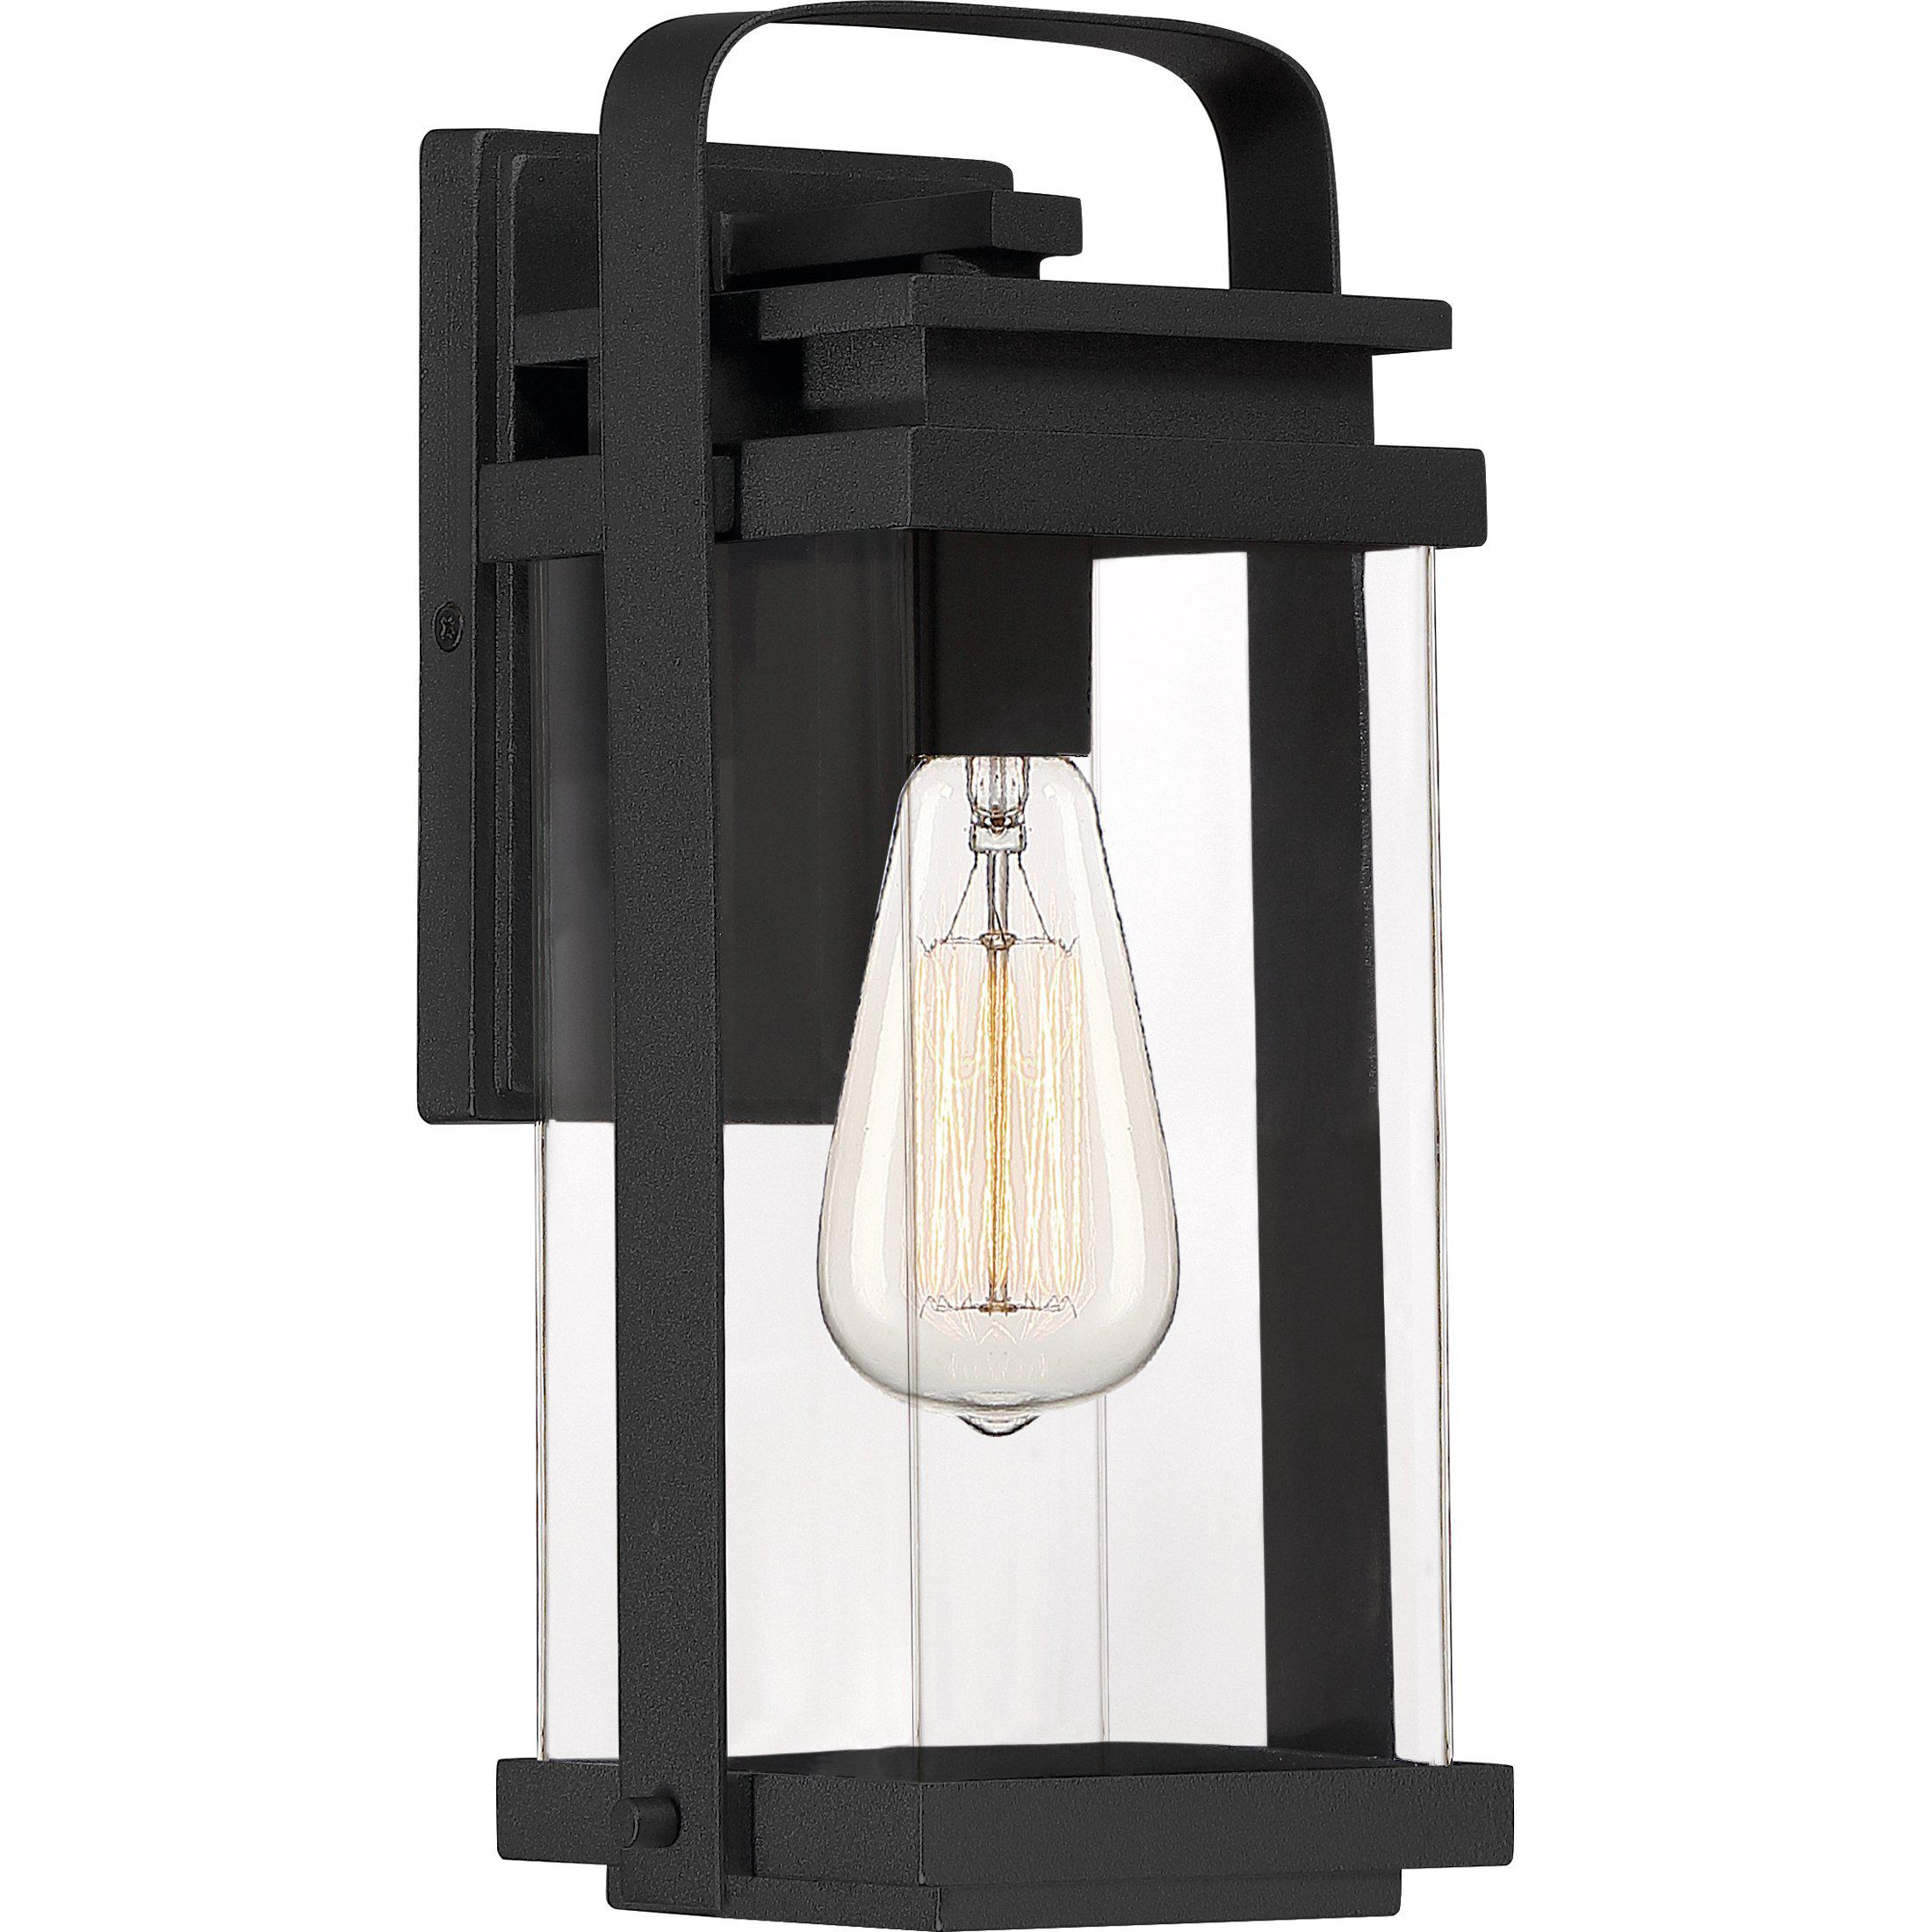 Quoizel  Exhibit Outdoor Lantern, Small Outdoor l Wall Quoizel Earth Black  